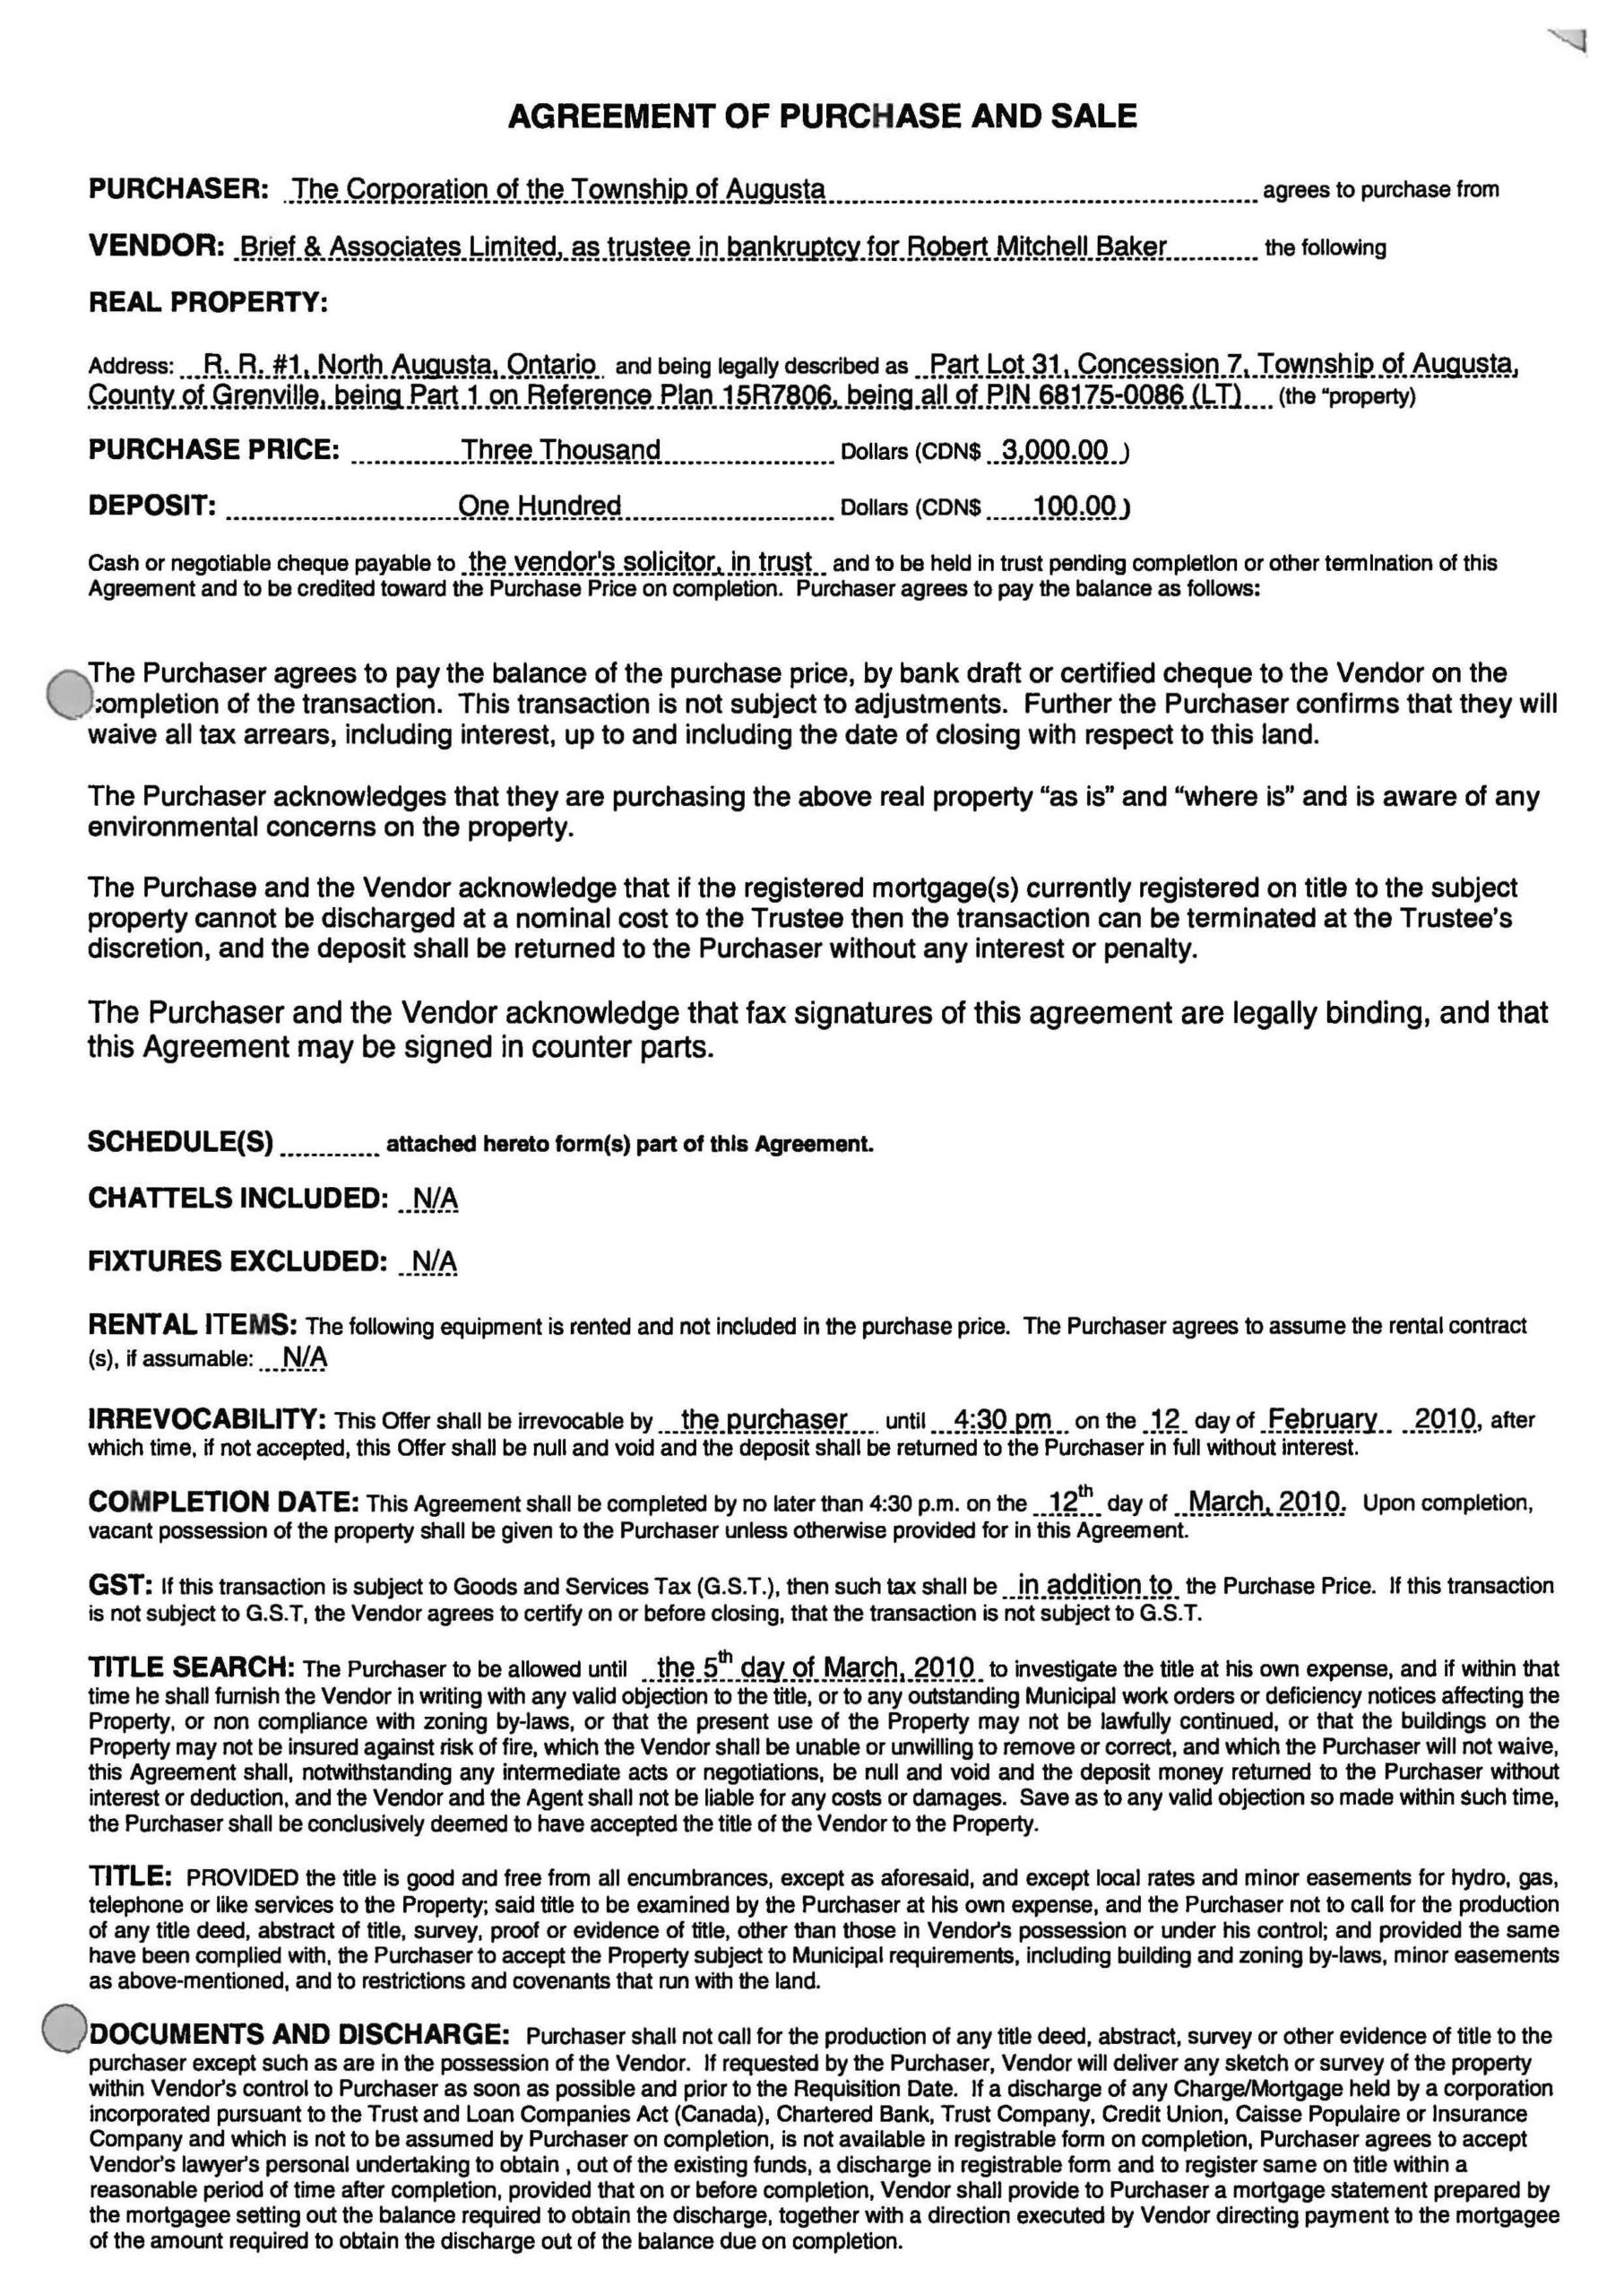 Agreement of purchase and sale, page 01